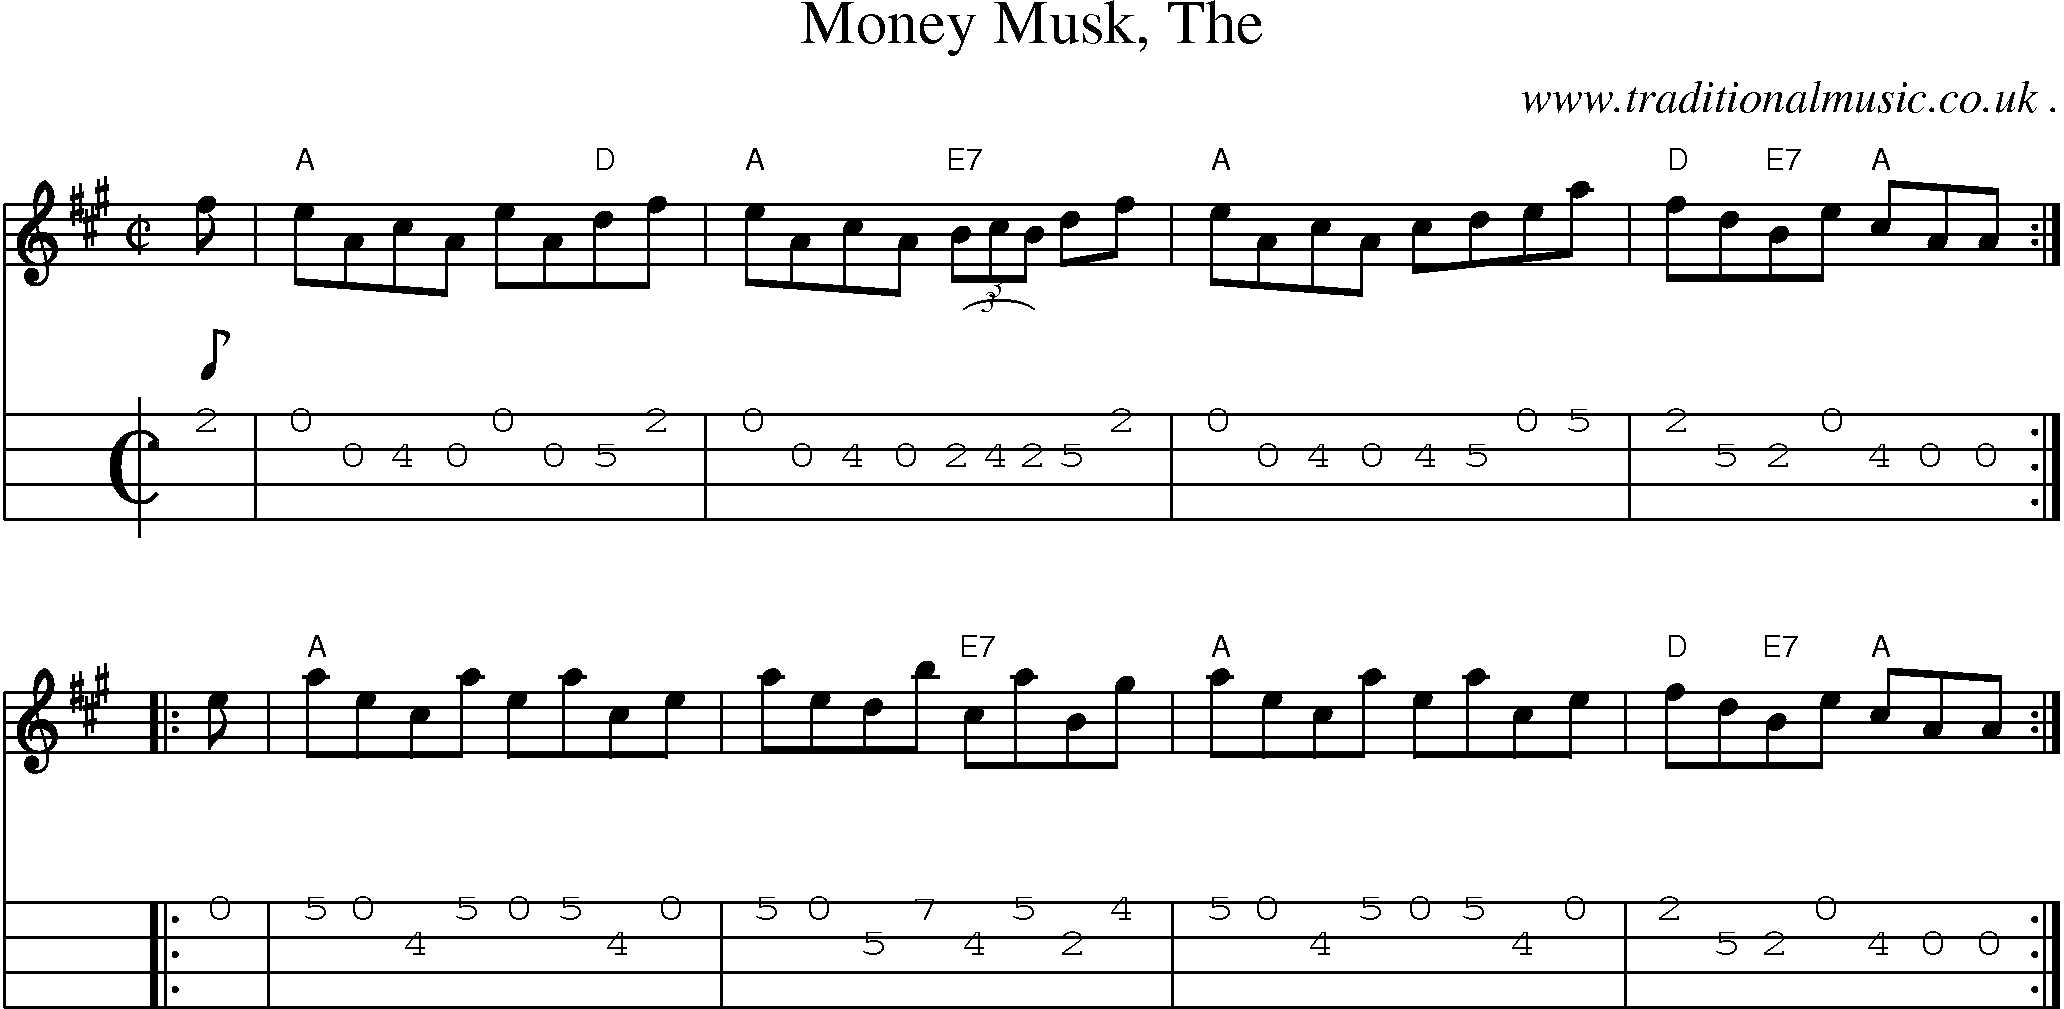 Music Score and Guitar Tabs for Money Musk The